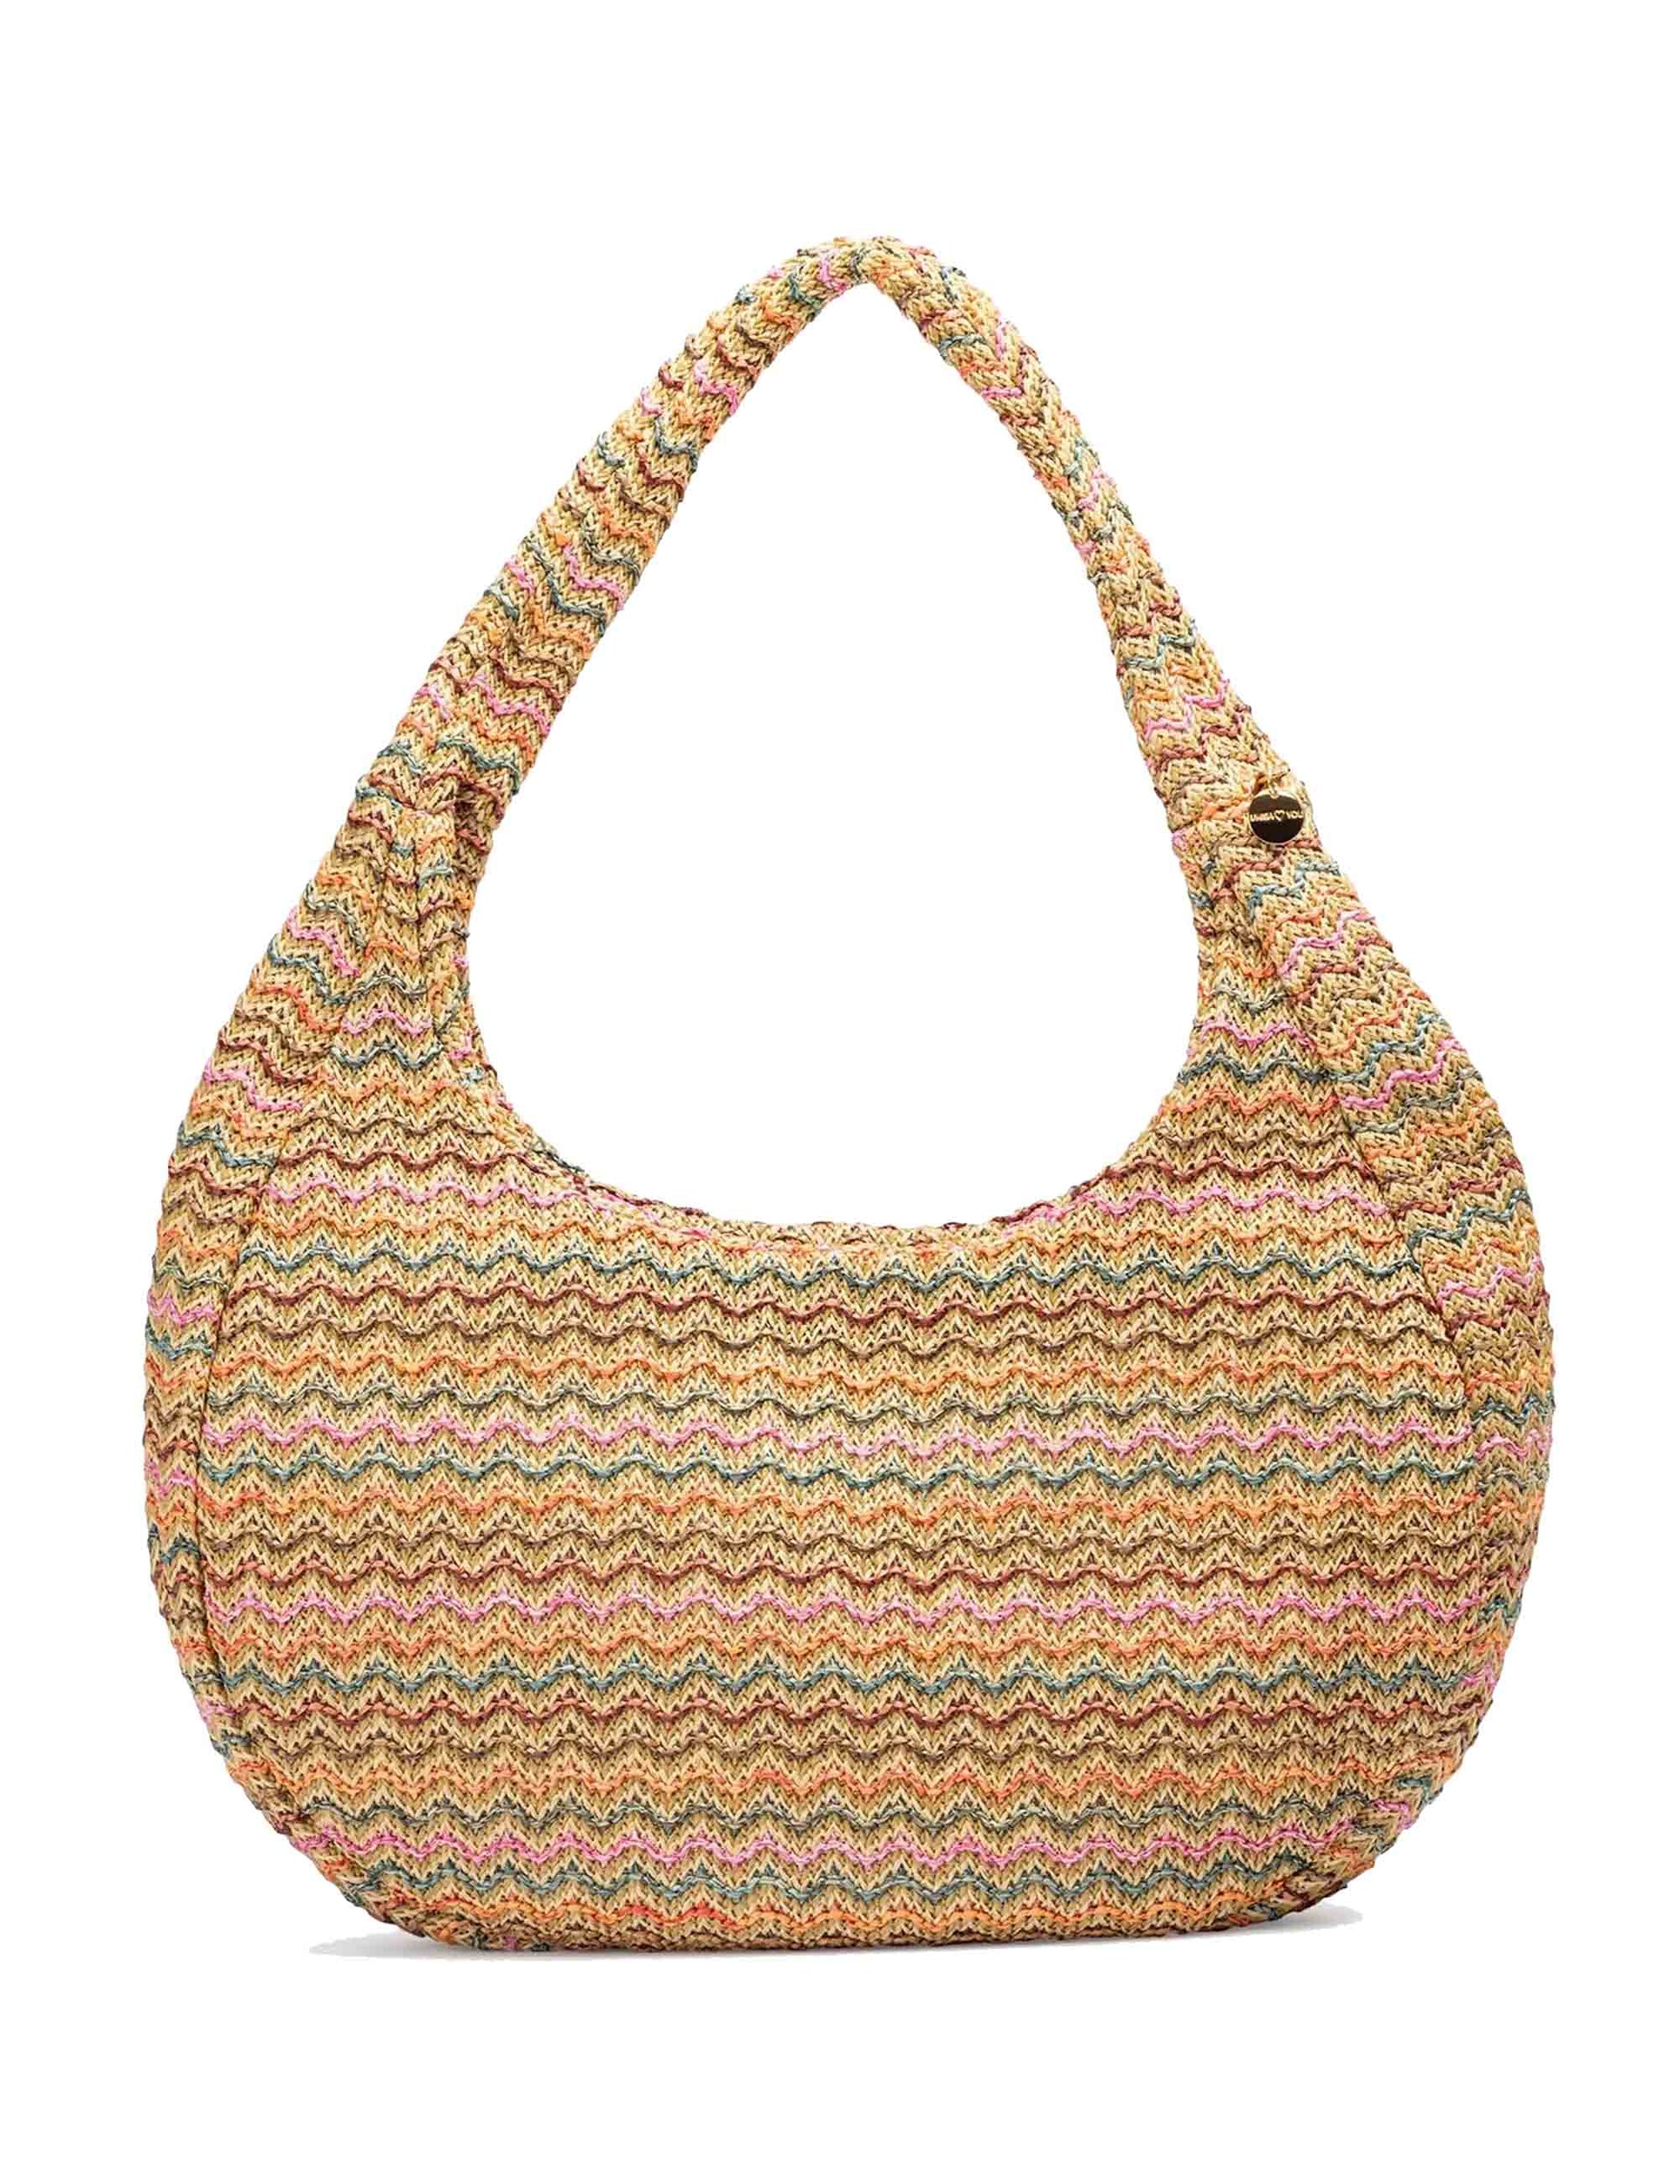 Women's shoulder bags in natural and multicolored raffia